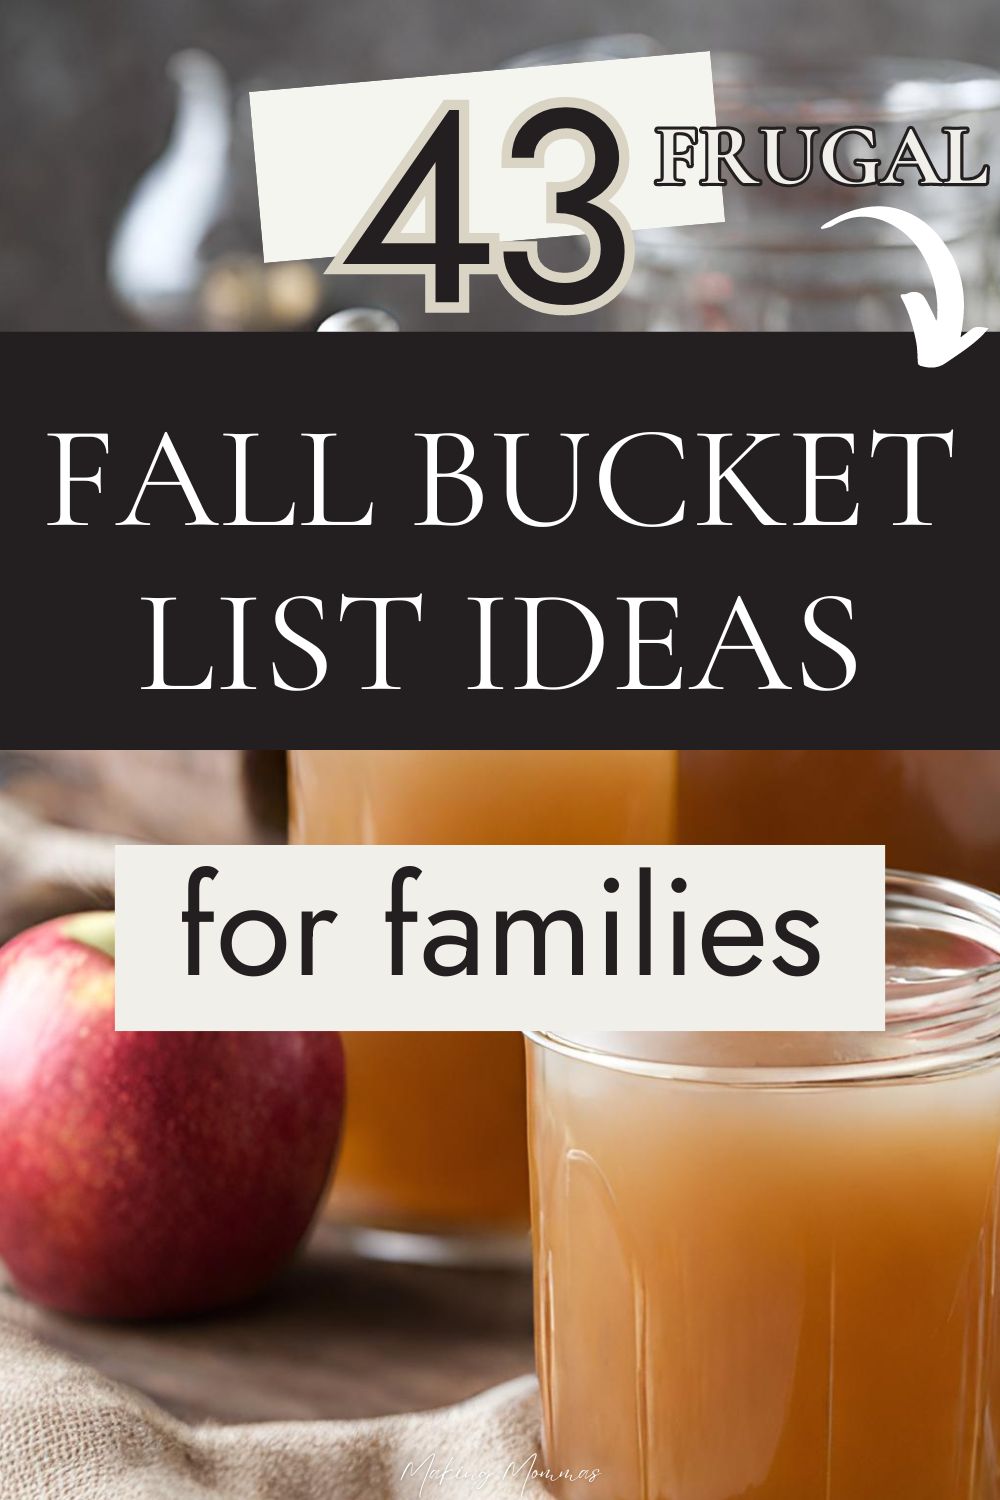 Pin image reading, "43 Frugal fall bucket list ideas for families" with an image of apple cider and an apple.